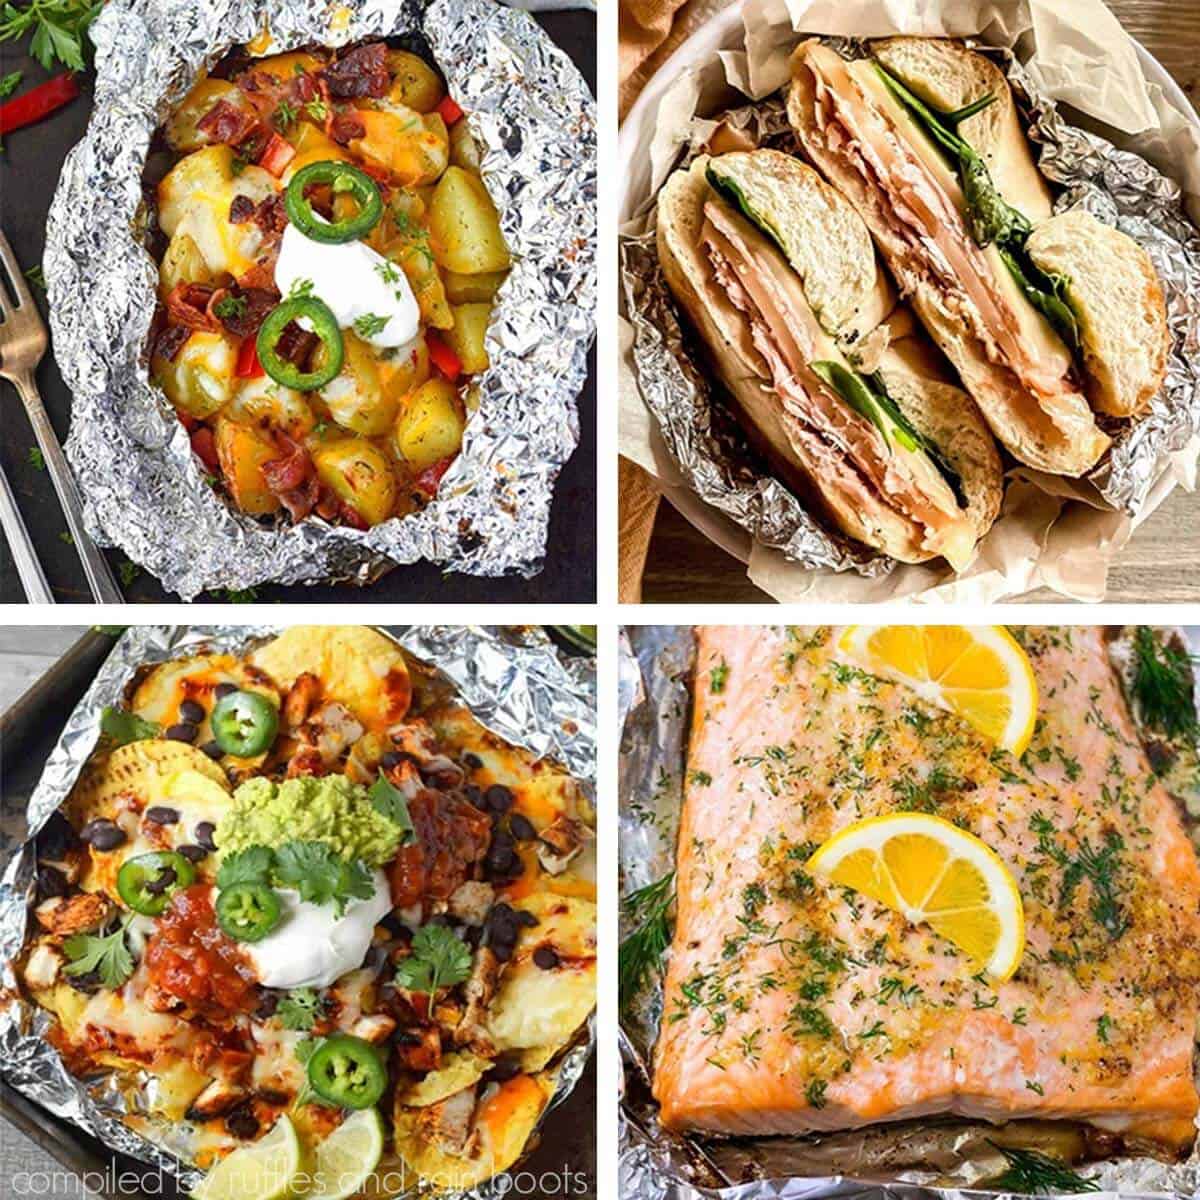 Square four image collage of baked potatoes, nachos, salmon, bagels, and other campfire foil pack meal ideas.